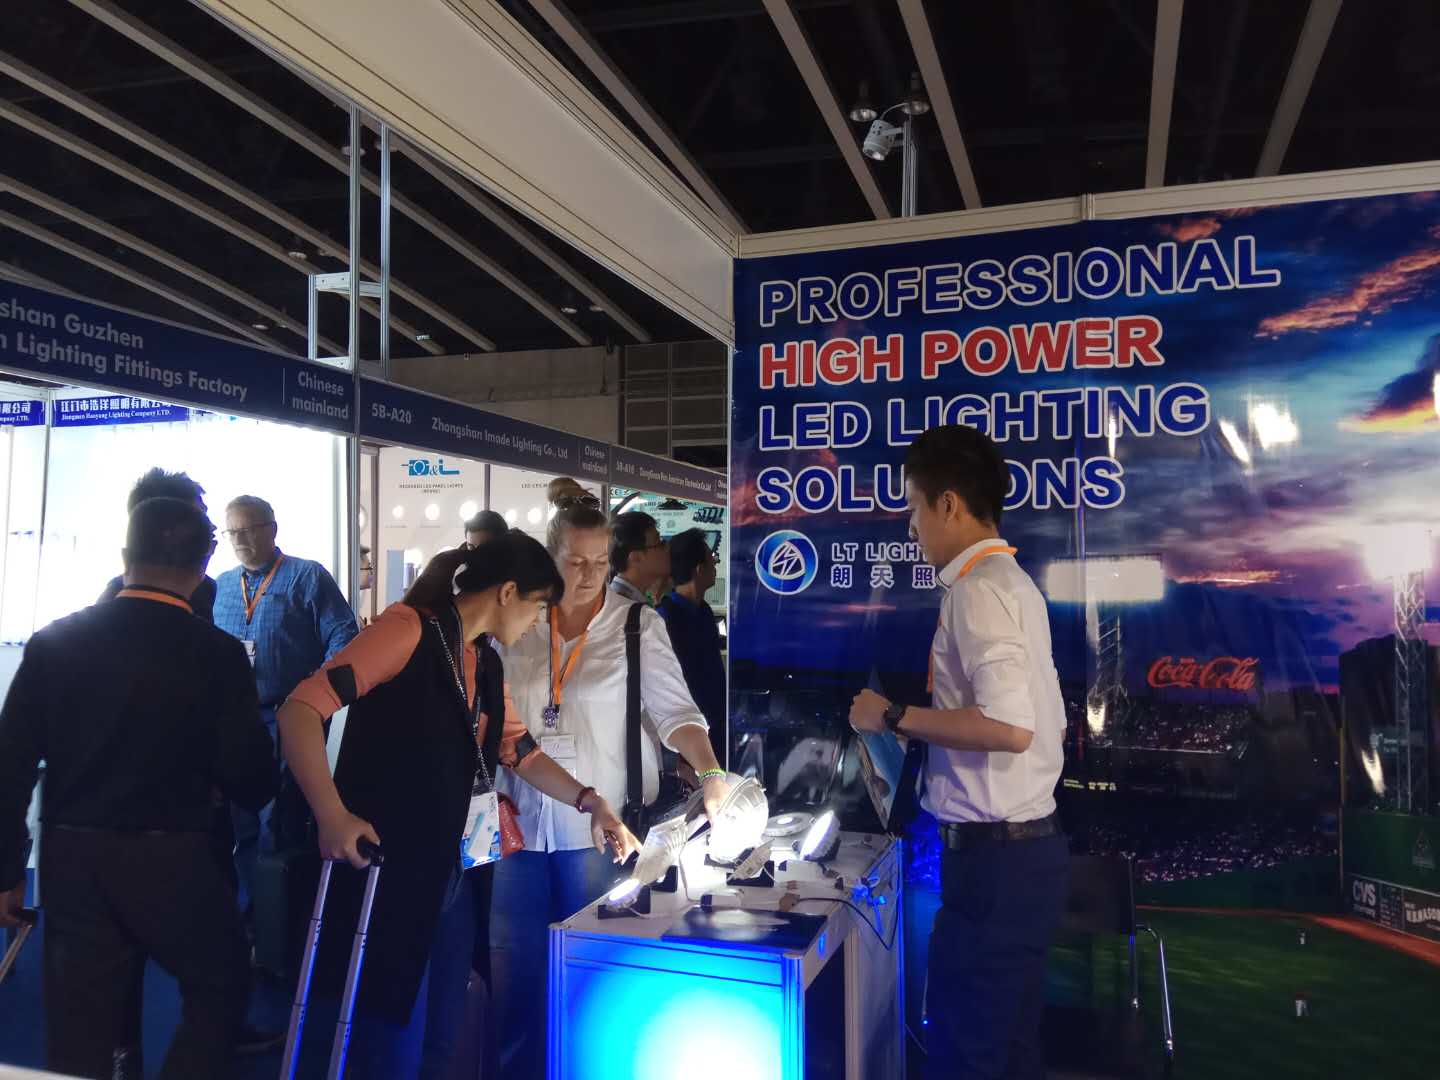 Welcoming visitors to our booth at the 2017 Hong Kong Lighting Fair